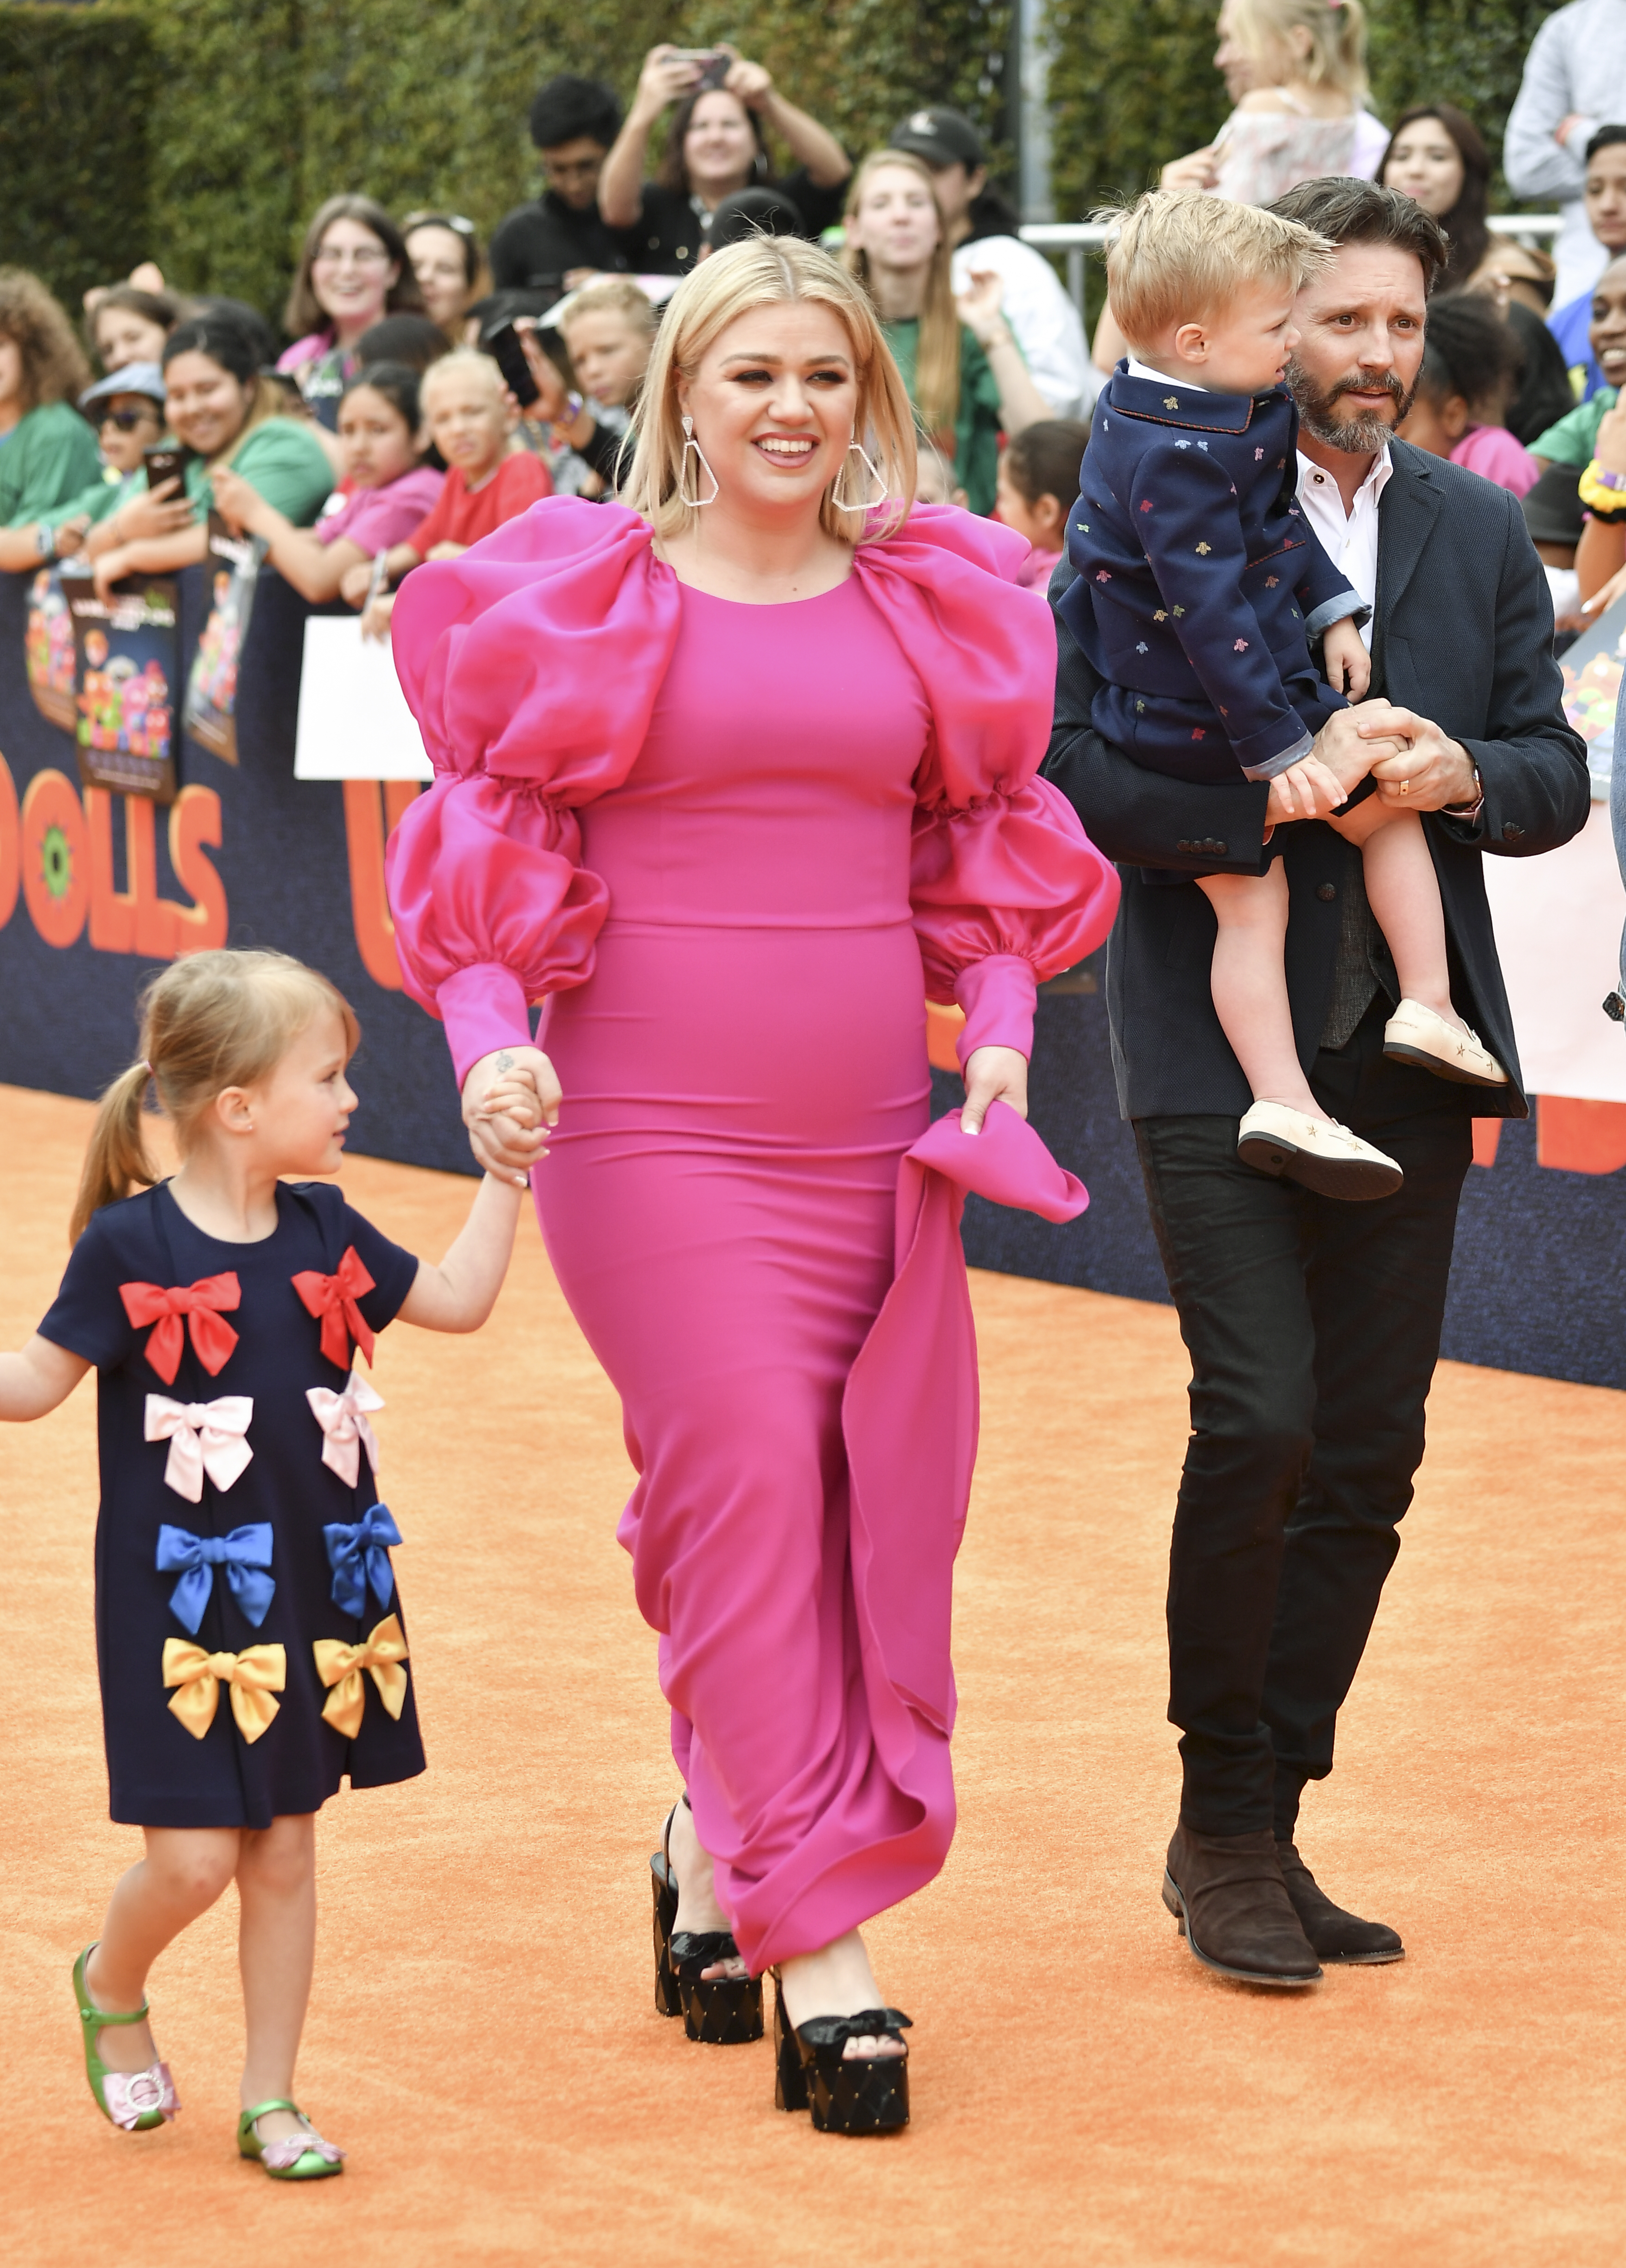 River Rose Blackstock, Kelly Clarkson, Remington Alexander Blackstock, and Brandon Blackstock at the "UglyDolls" film premiere, in Los Angeles, on April 27, 2019 | Source: Getty Images